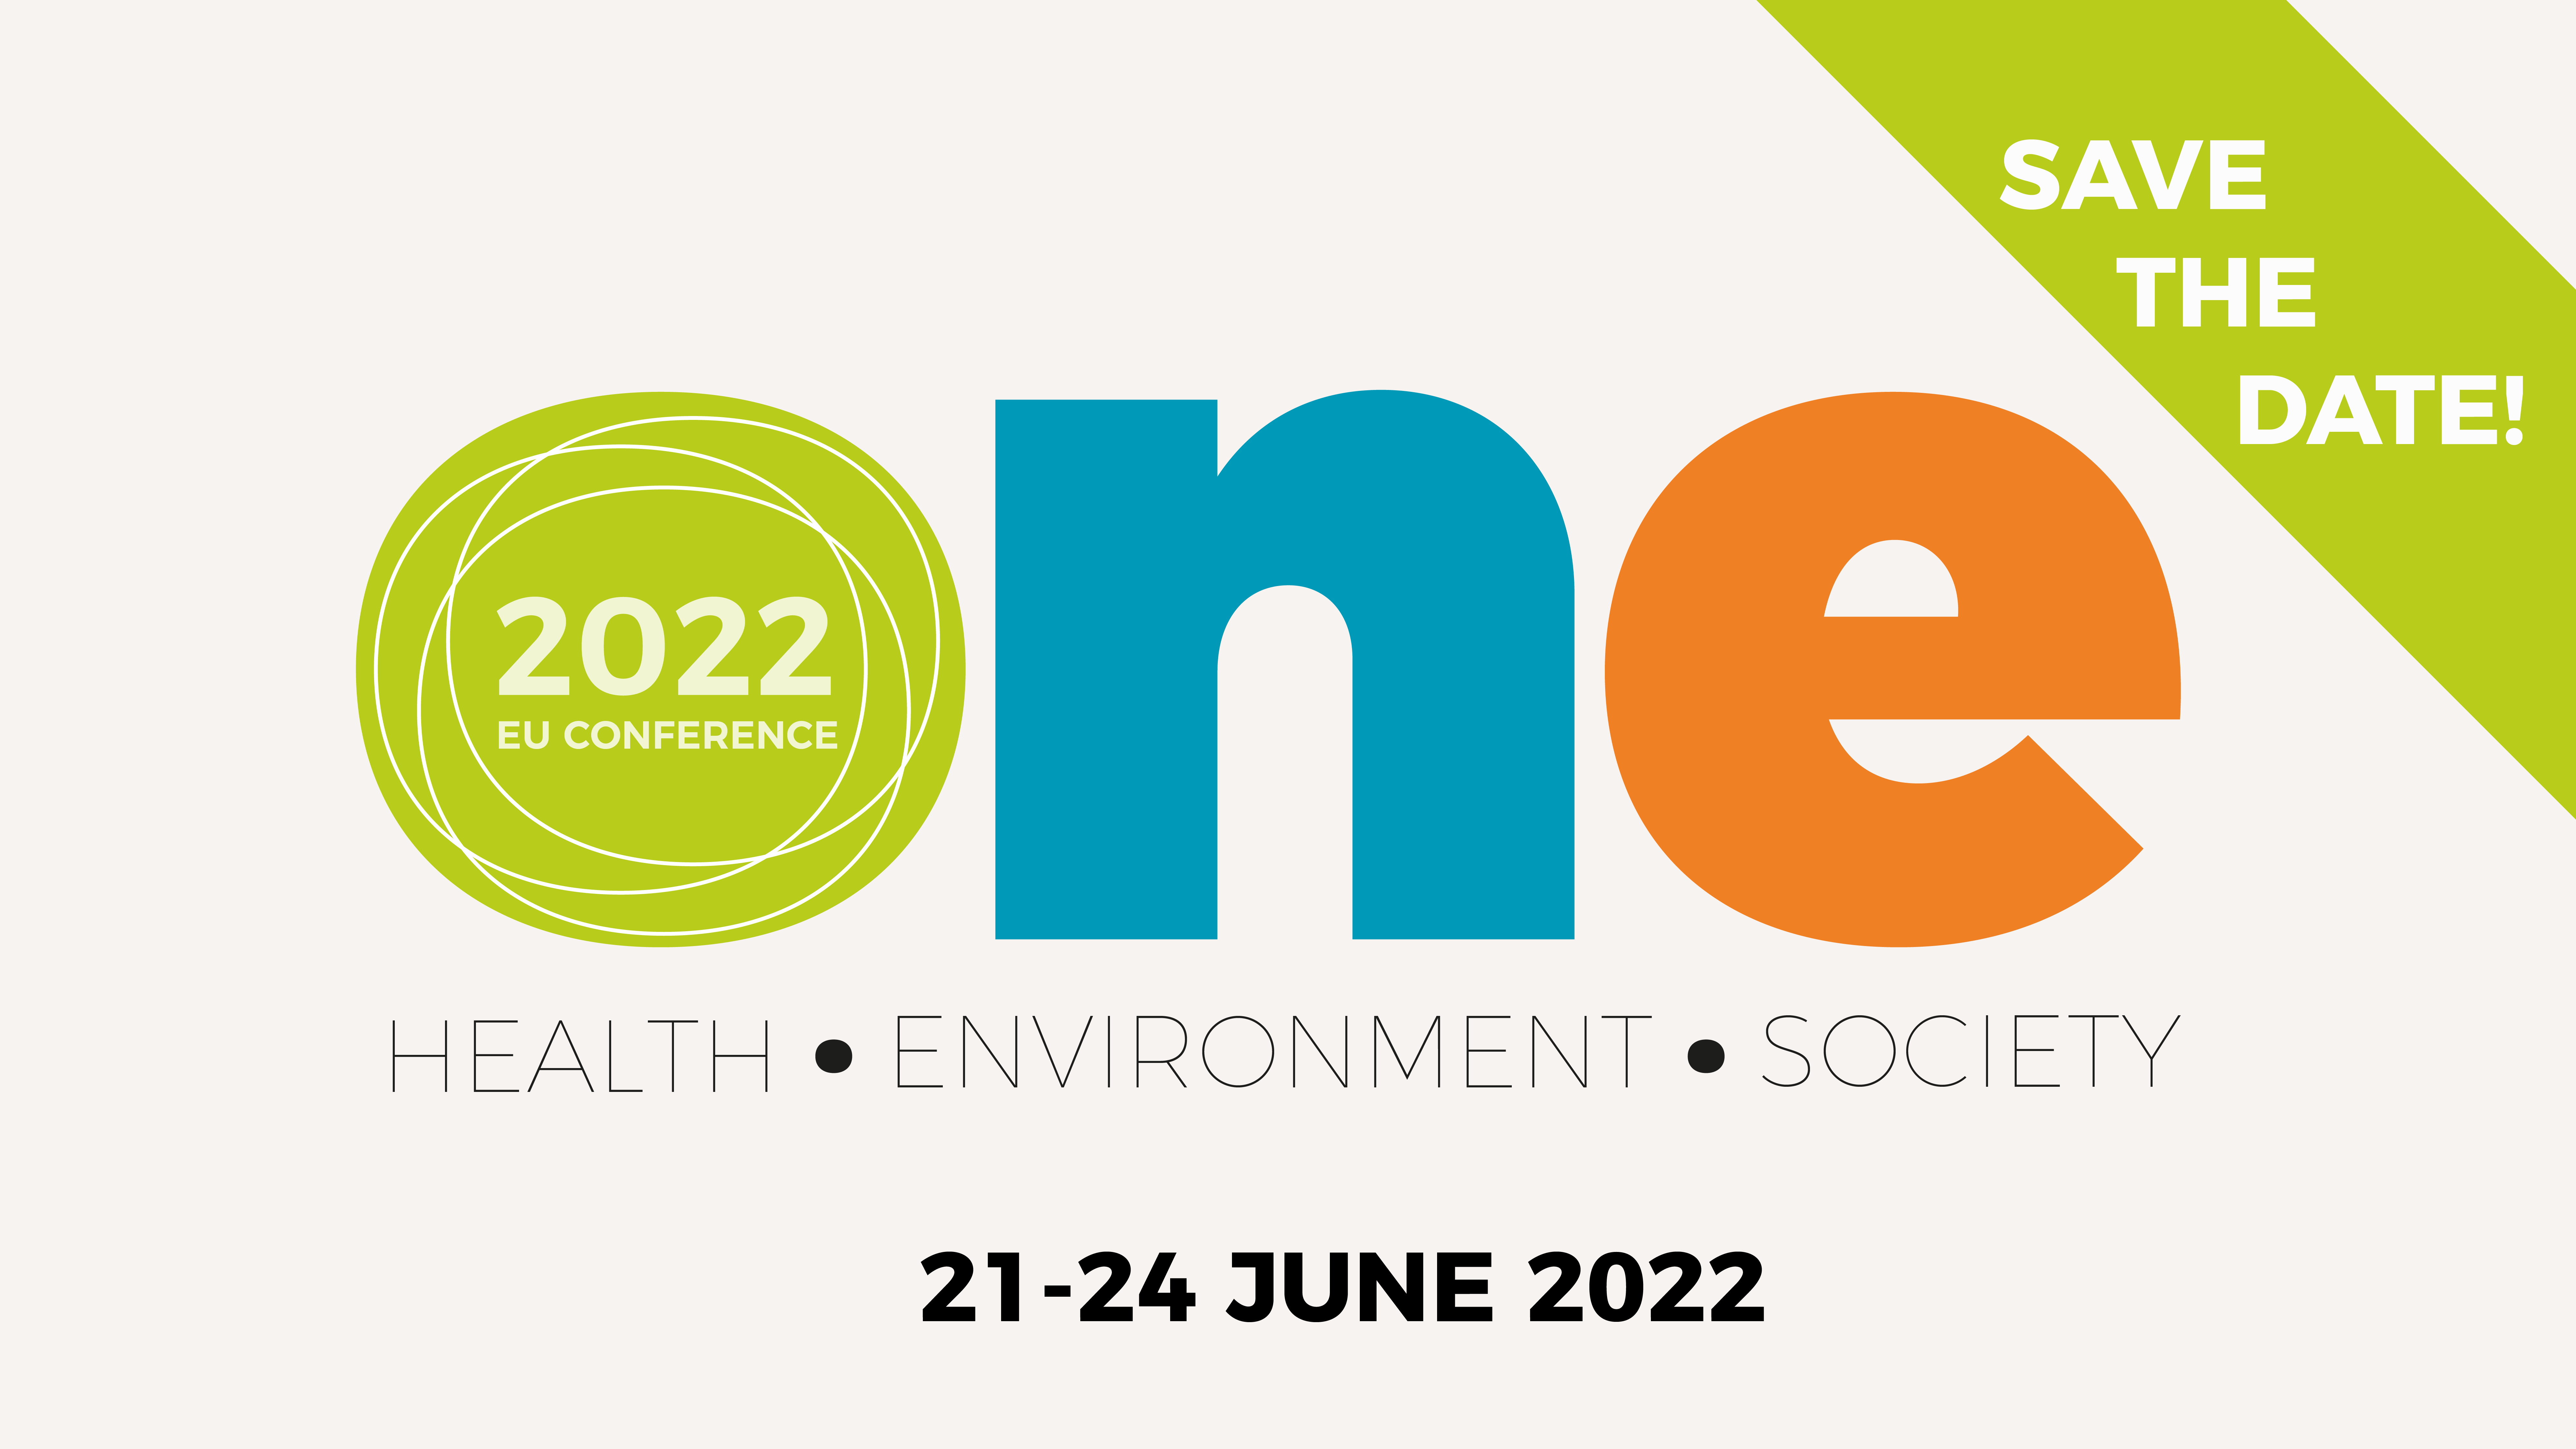 Save the date for https://www.one2022.eu/